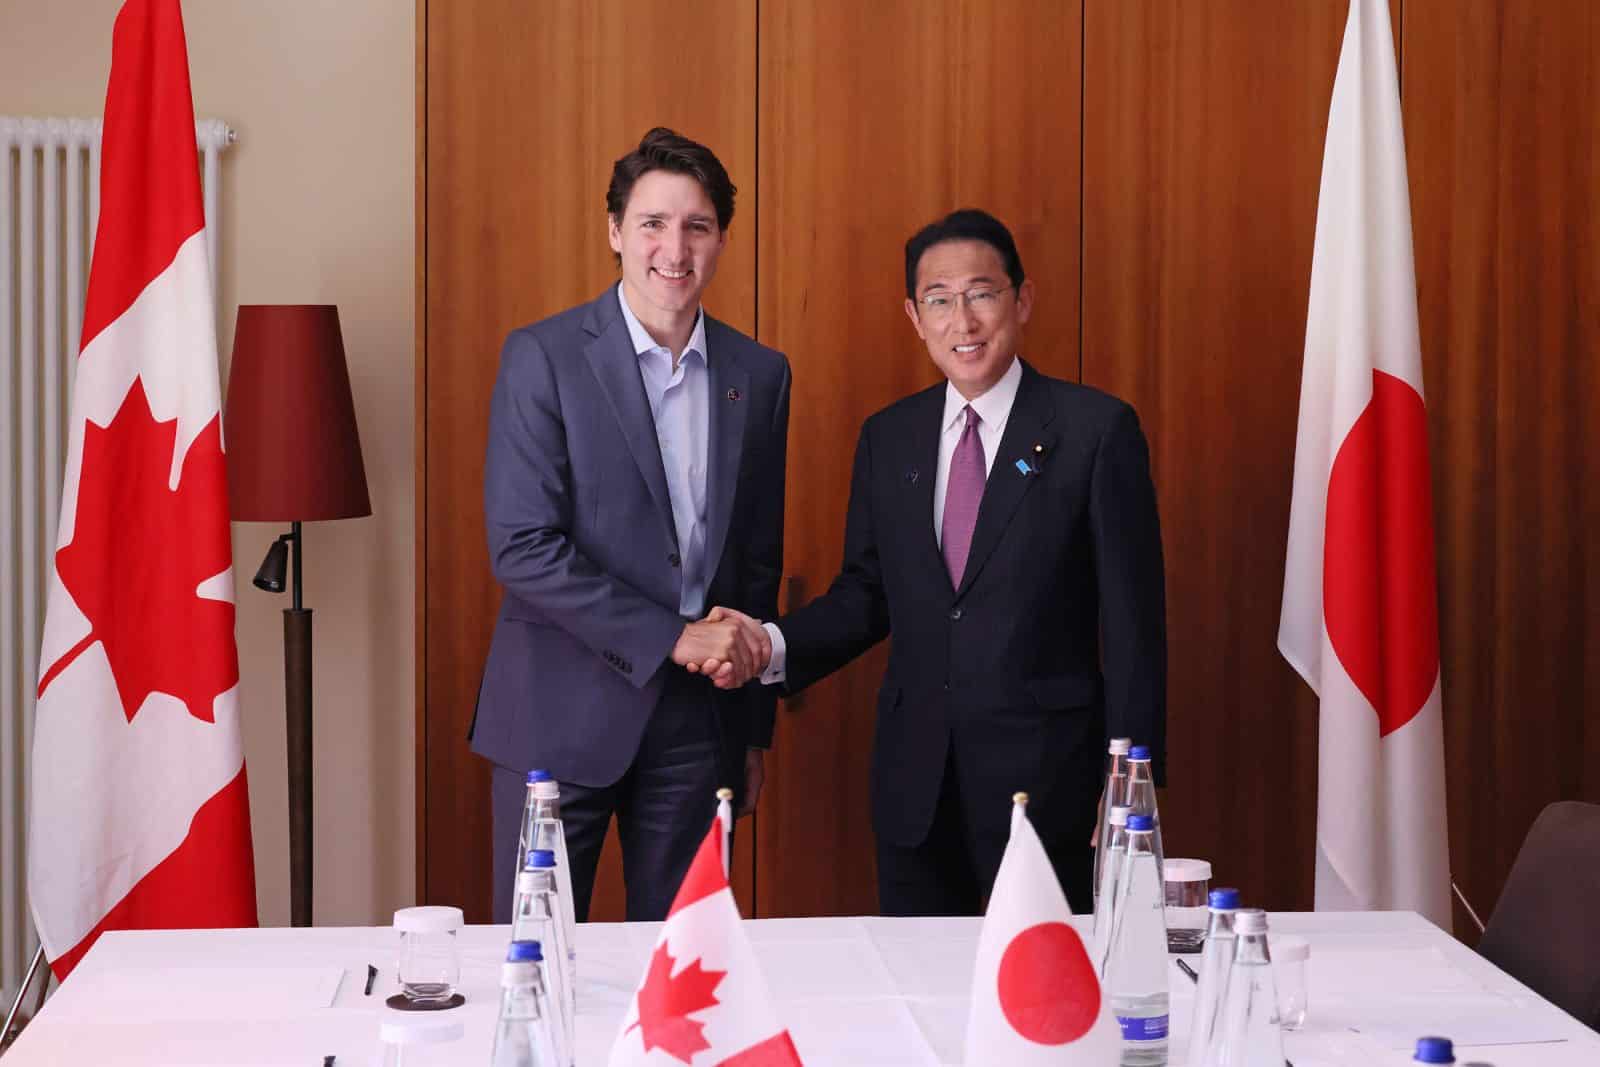 Canadian and Japanese Prime Ministers agreed to promote G7 cooperation to help Ukraine